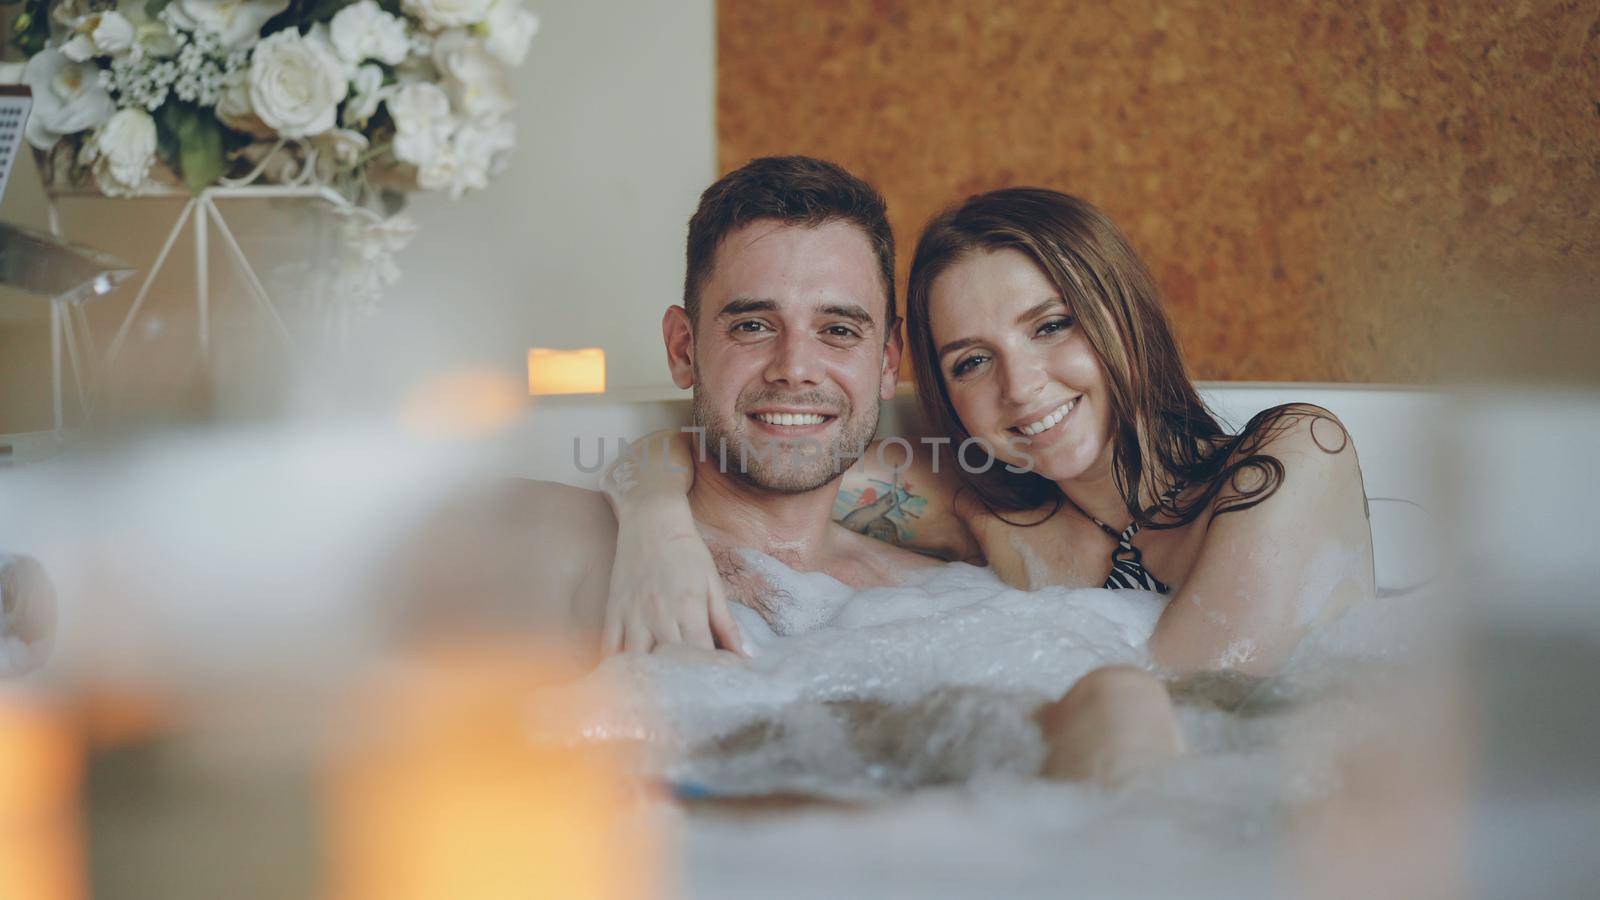 Portrait of good-looking young lovers hugging in jacuzzi, smiling and looking at camera. Burning candles, beautiful flowers and bubbling water is visible. by silverkblack